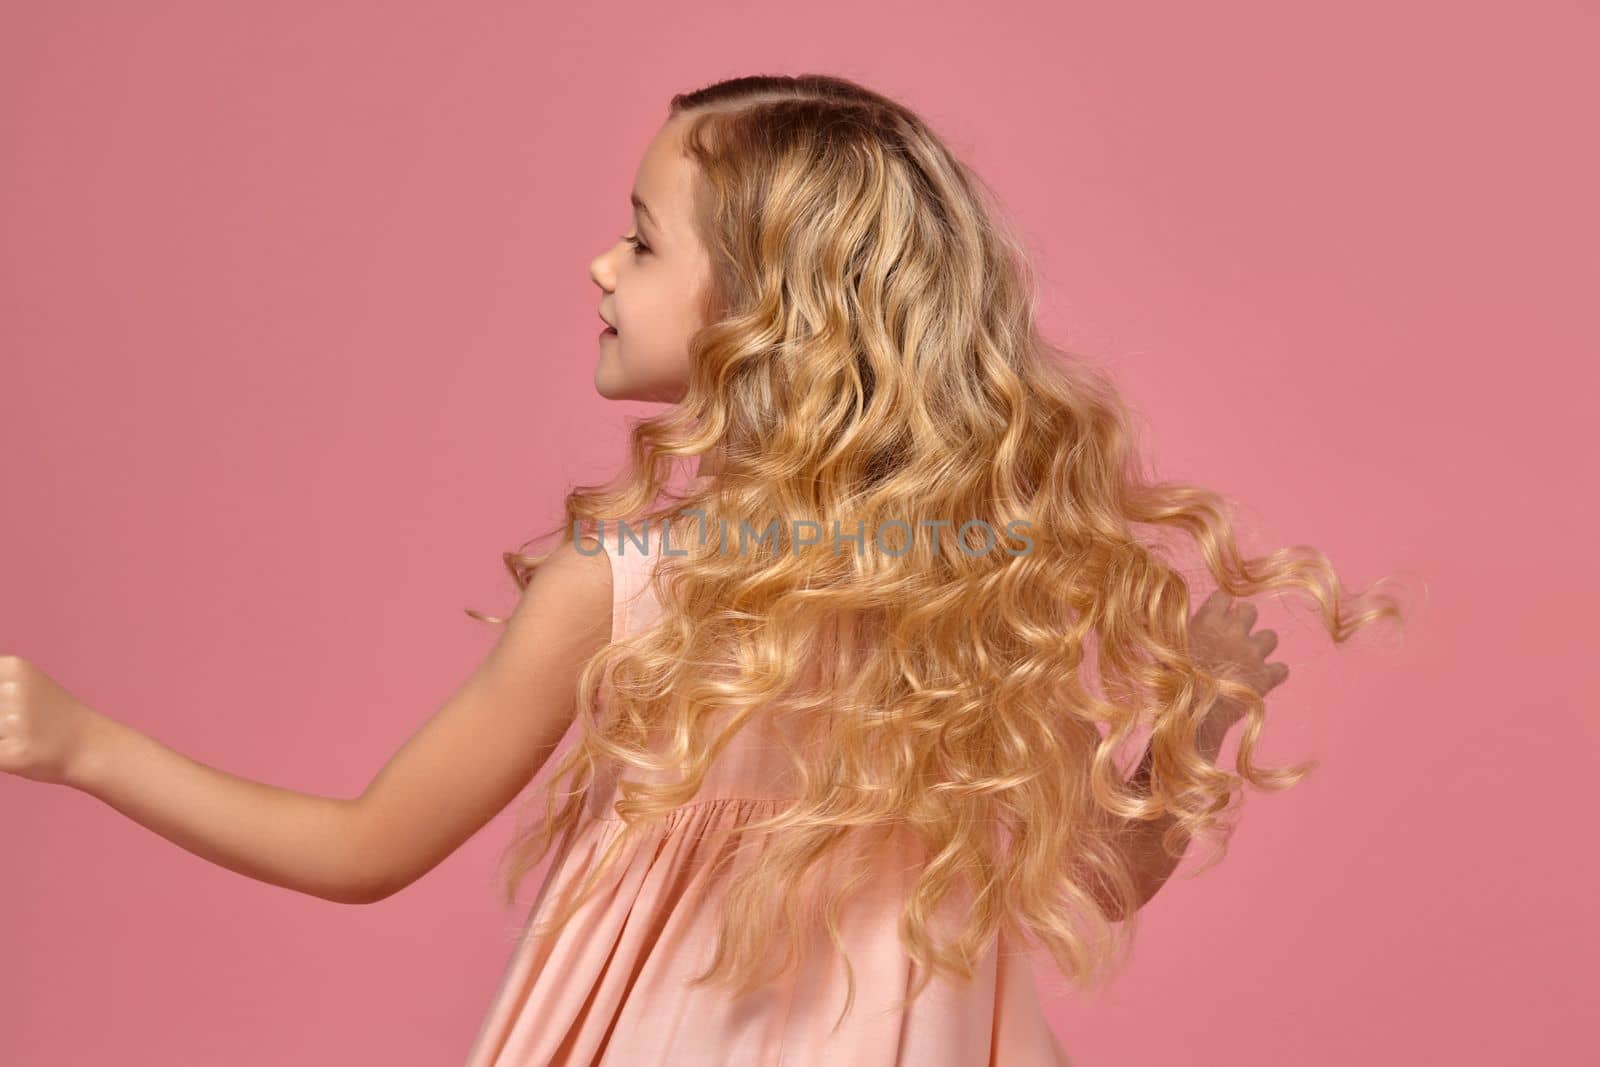 Beautiful little girl with a blond curly hair, in a pink dress is spinning around fot the camera, on a pink background